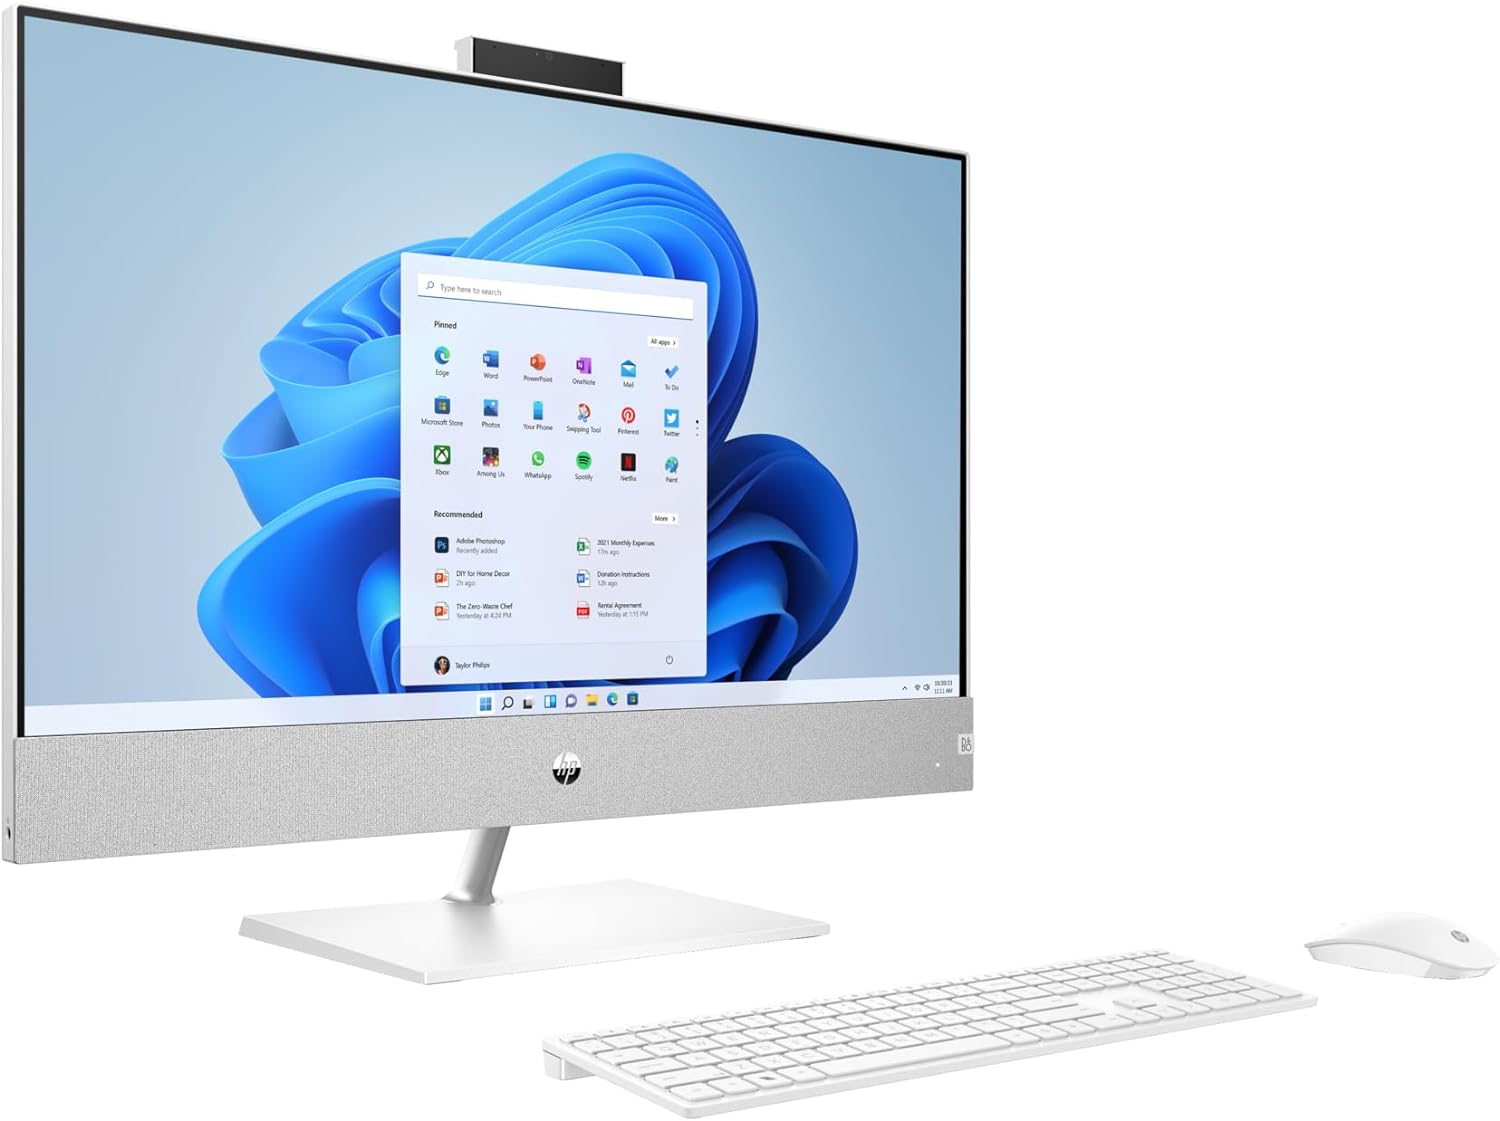 HP Pavilion 27 All-in-One Desktop Review